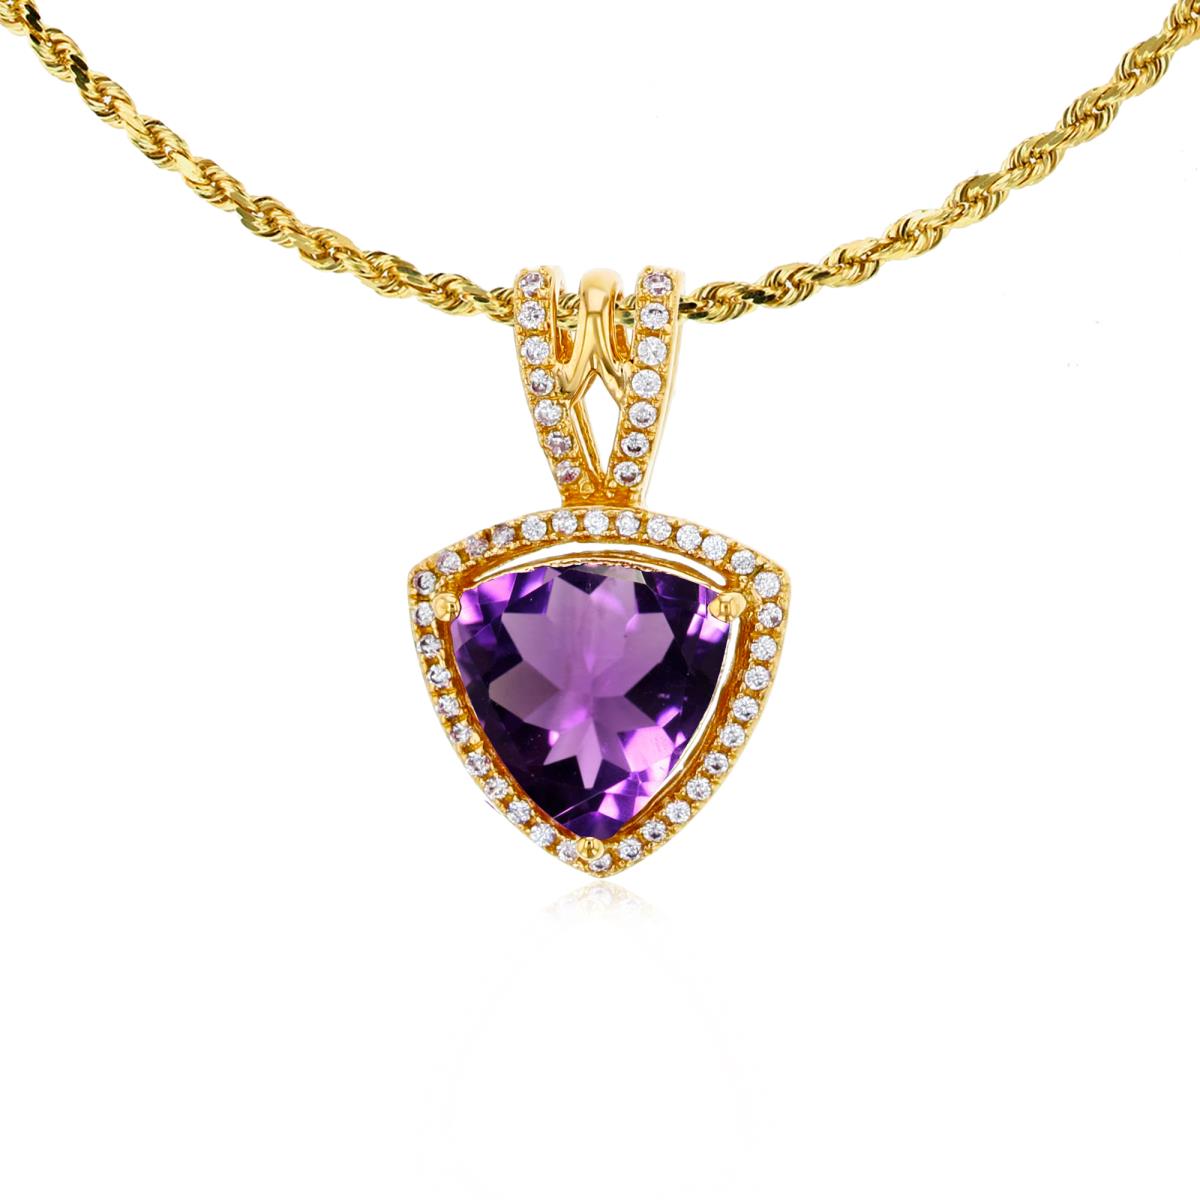 10K Yellow Gold 8mm Trillion Amethyst & 0.13 CTTW Diamonds Frame 18" Rope Chain Necklace